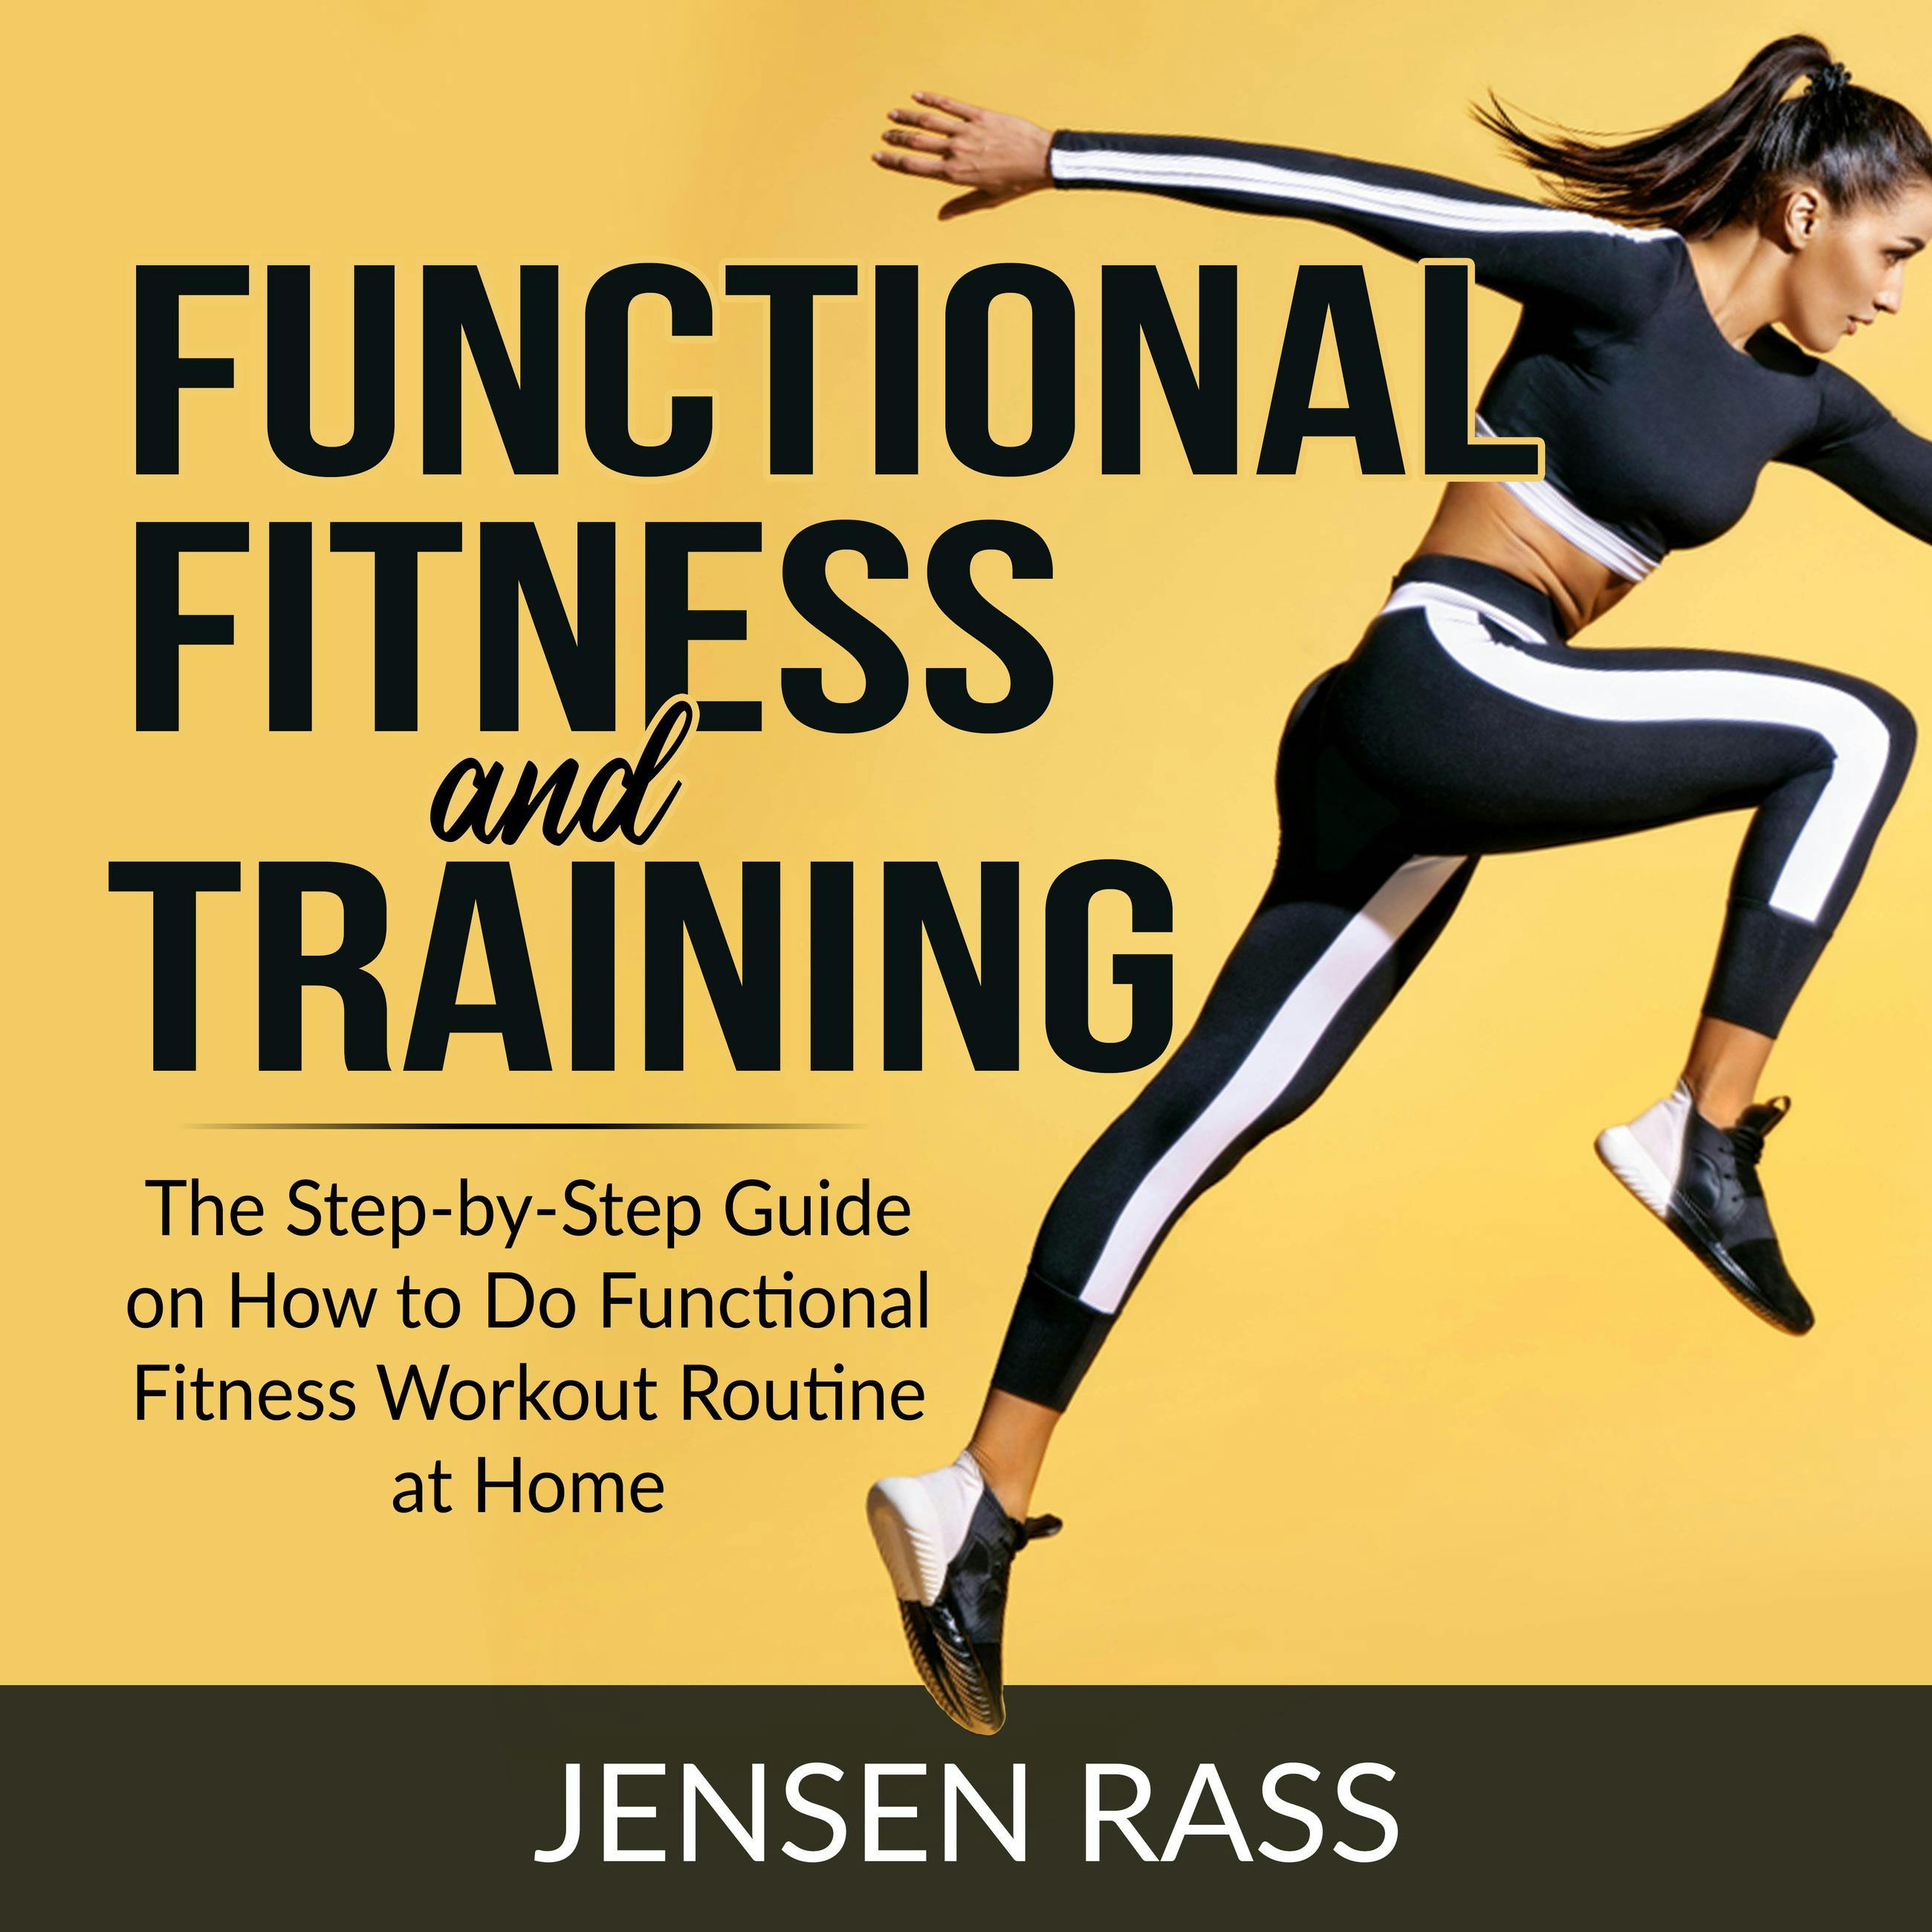 Functional Fitness and Training: The Step-by-Step Guide on How to Do Functional Fitness Workout Routine at Home - Jensen Rass